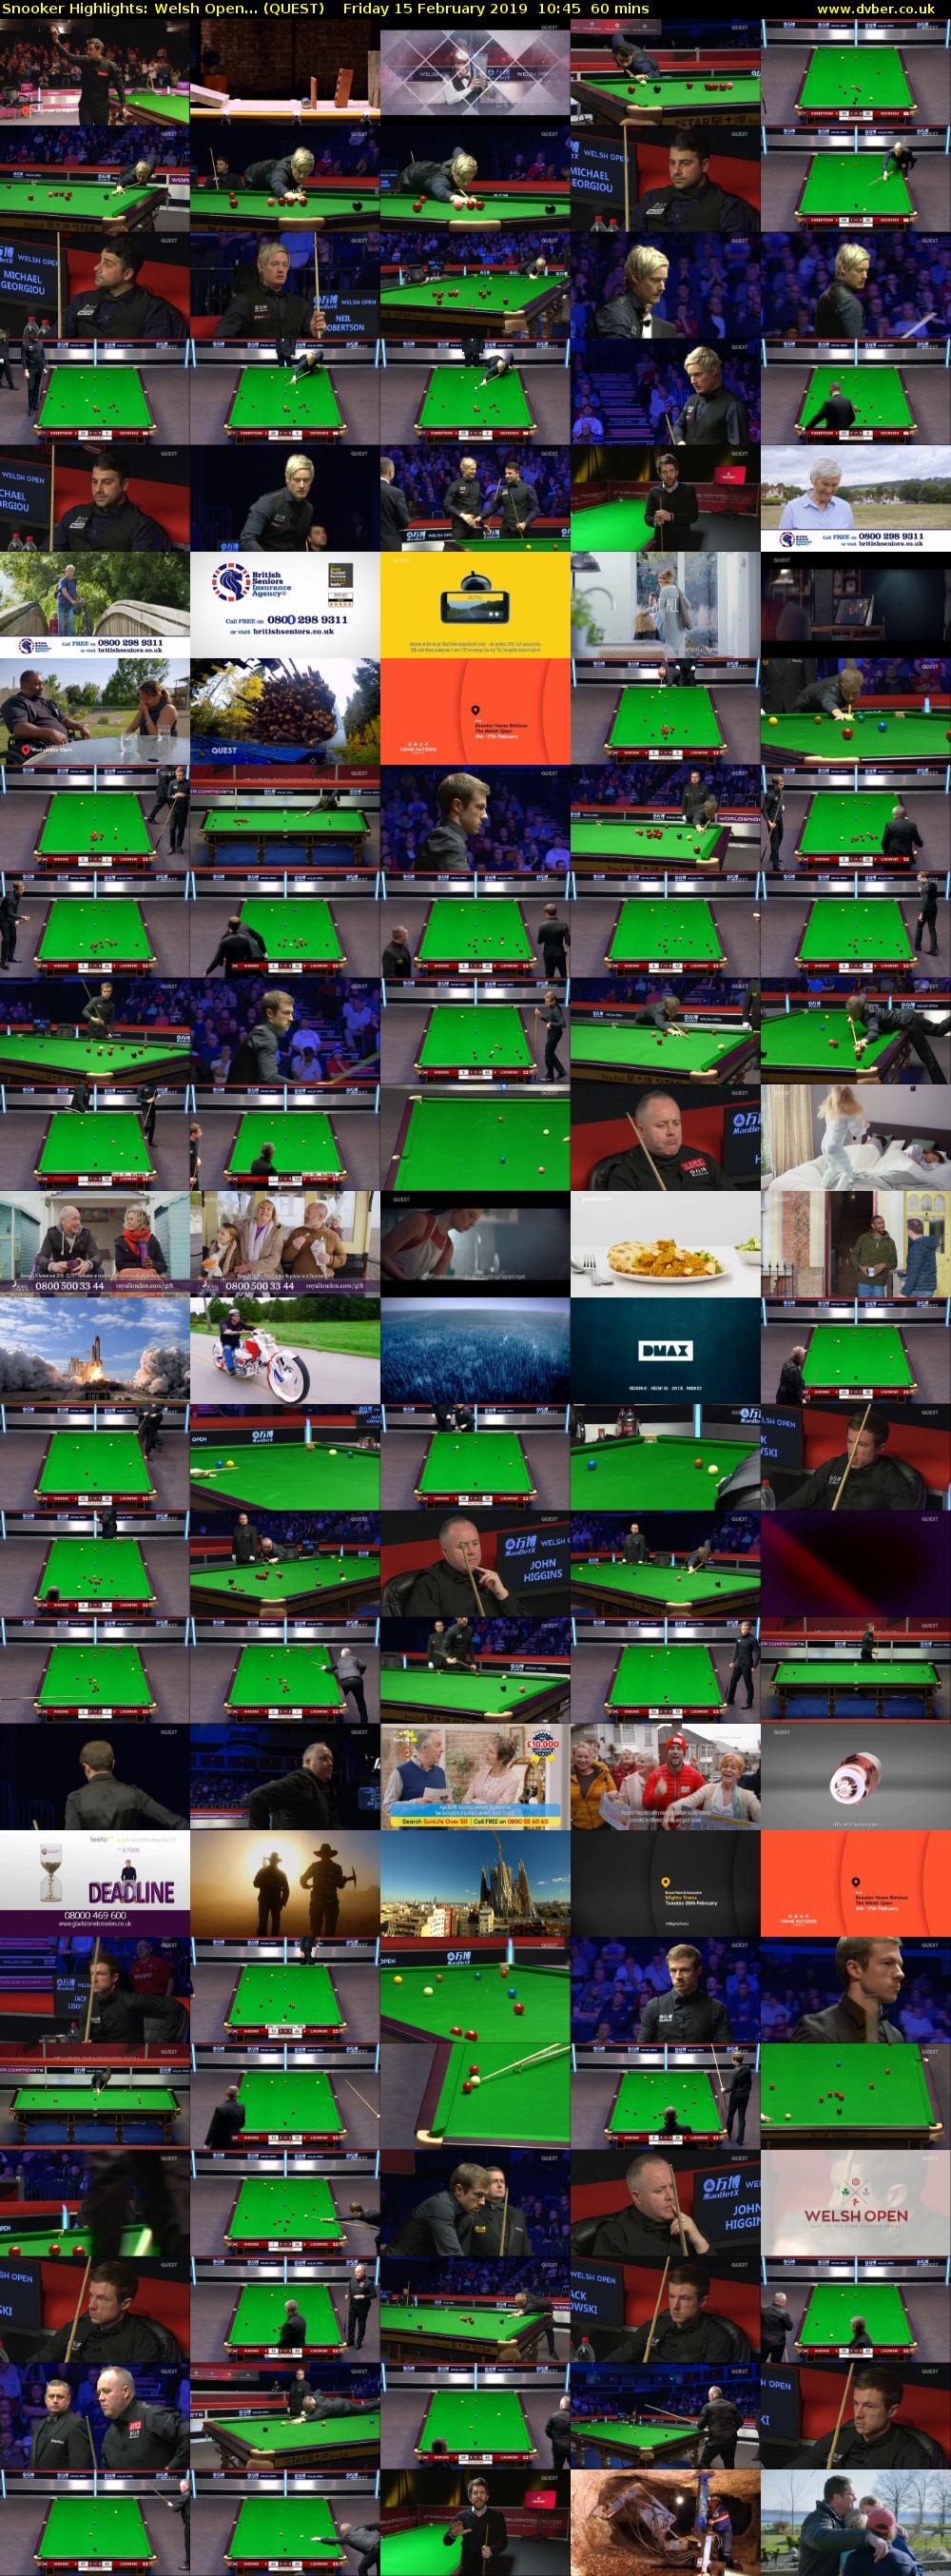 Snooker Highlights: Welsh Open... (QUEST) Friday 15 February 2019 10:45 - 11:45